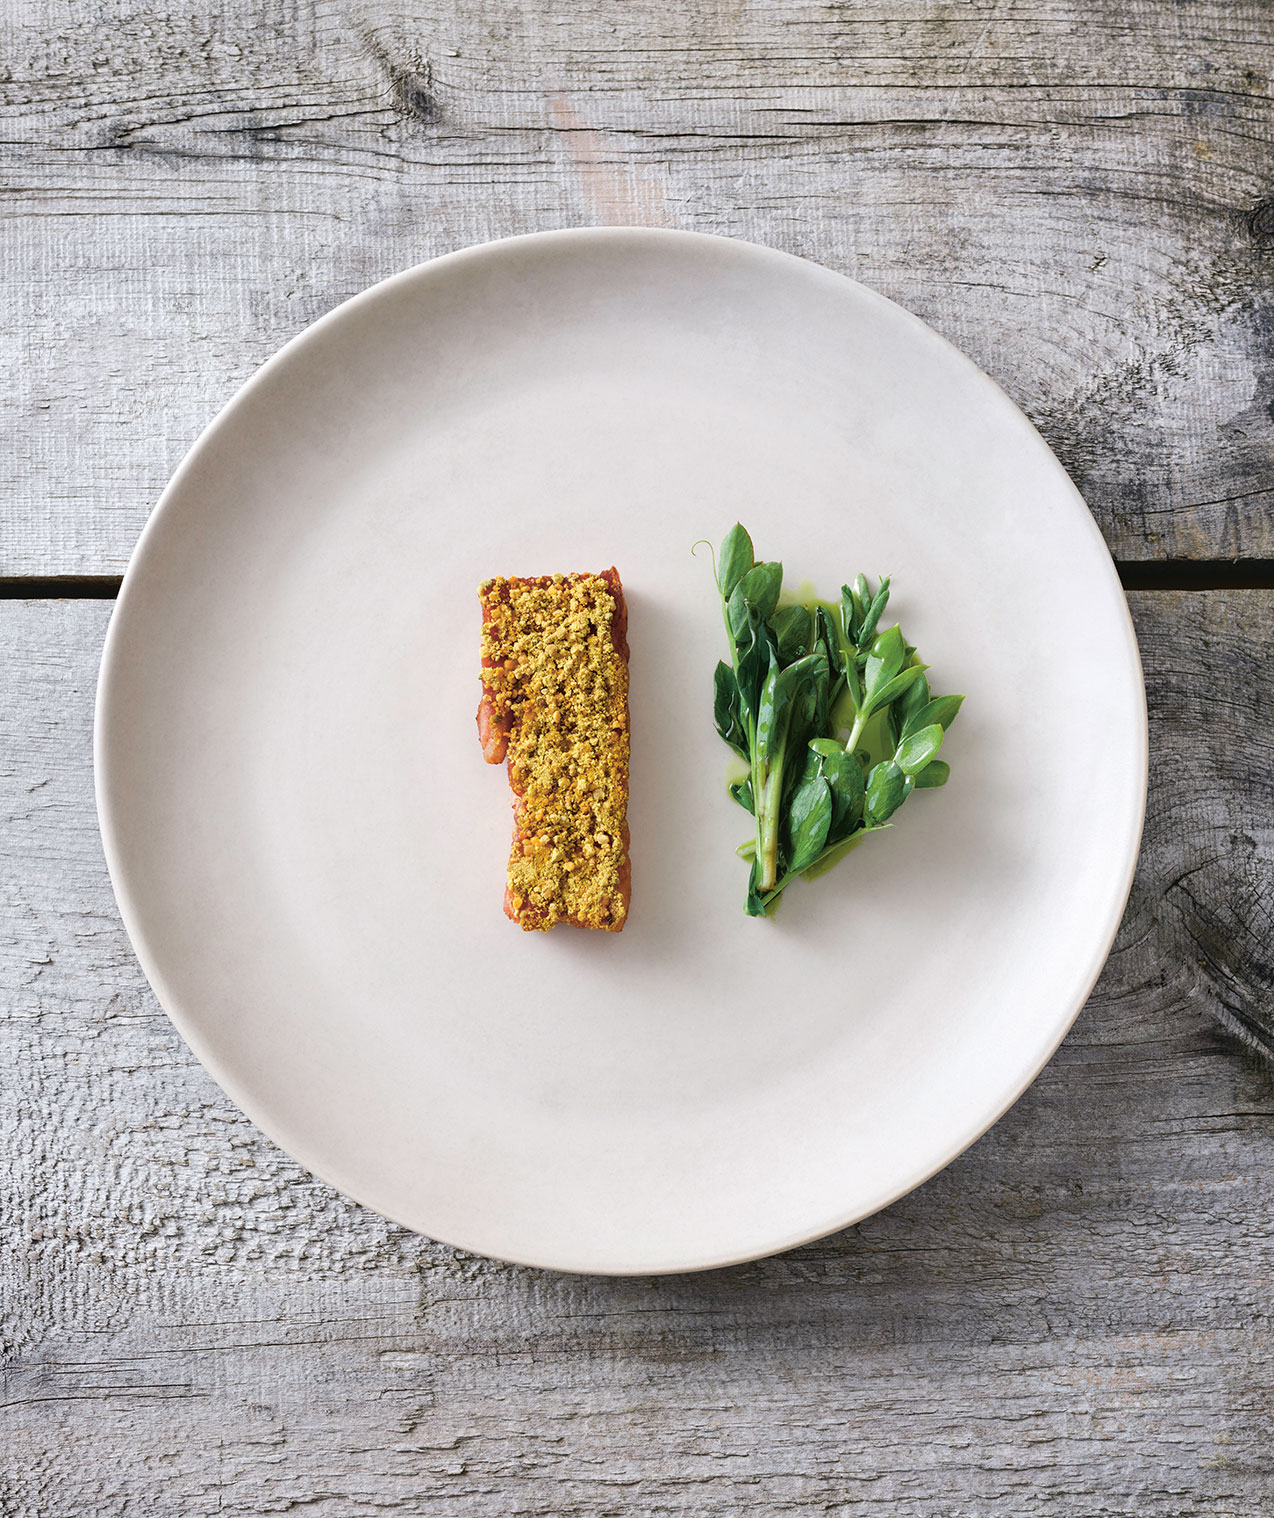 Confit pork belly, bee pollen and shore greens. Photograph by John Cullen. From Wildness